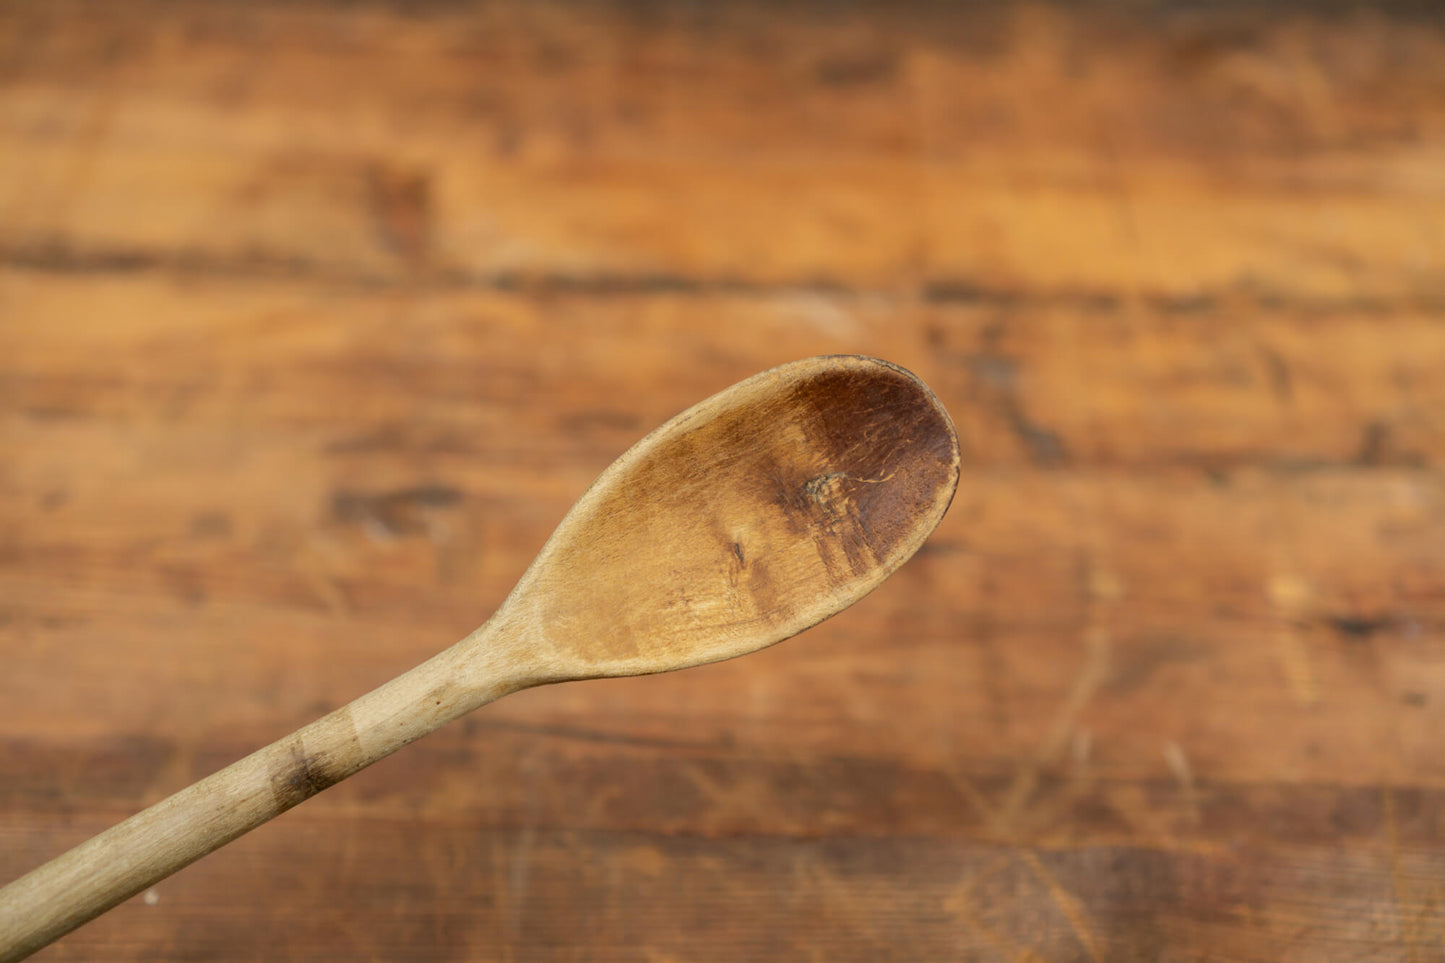 vintage wooden spoons for the victorian farmhouse style kitchen. Three spoons atop a wooden table with a blurred brick wall in the background.